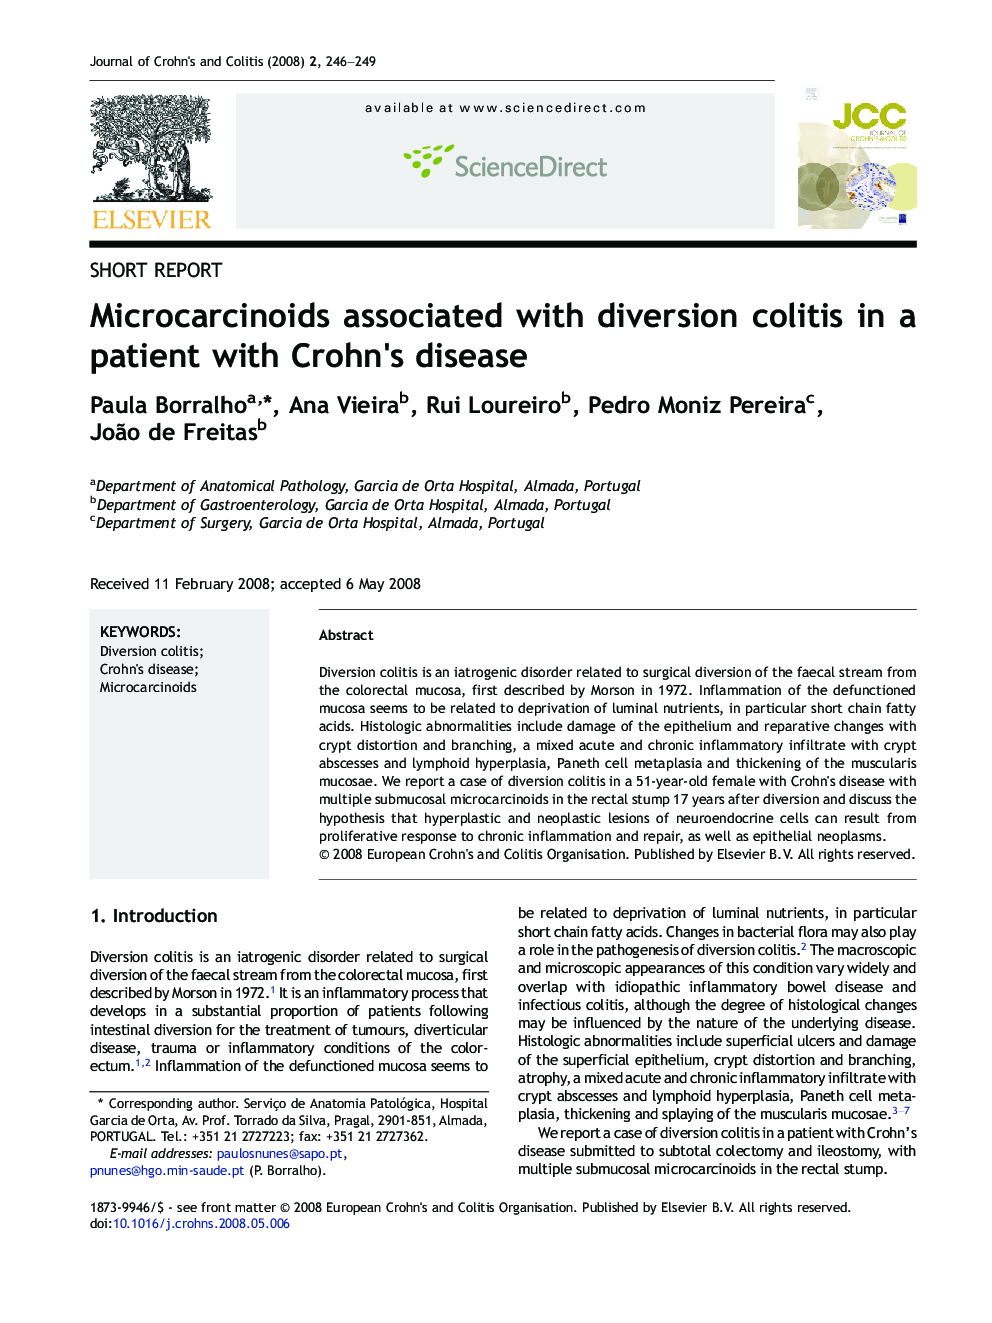 Microcarcinoids associated with diversion colitis in a patient with Crohn's disease